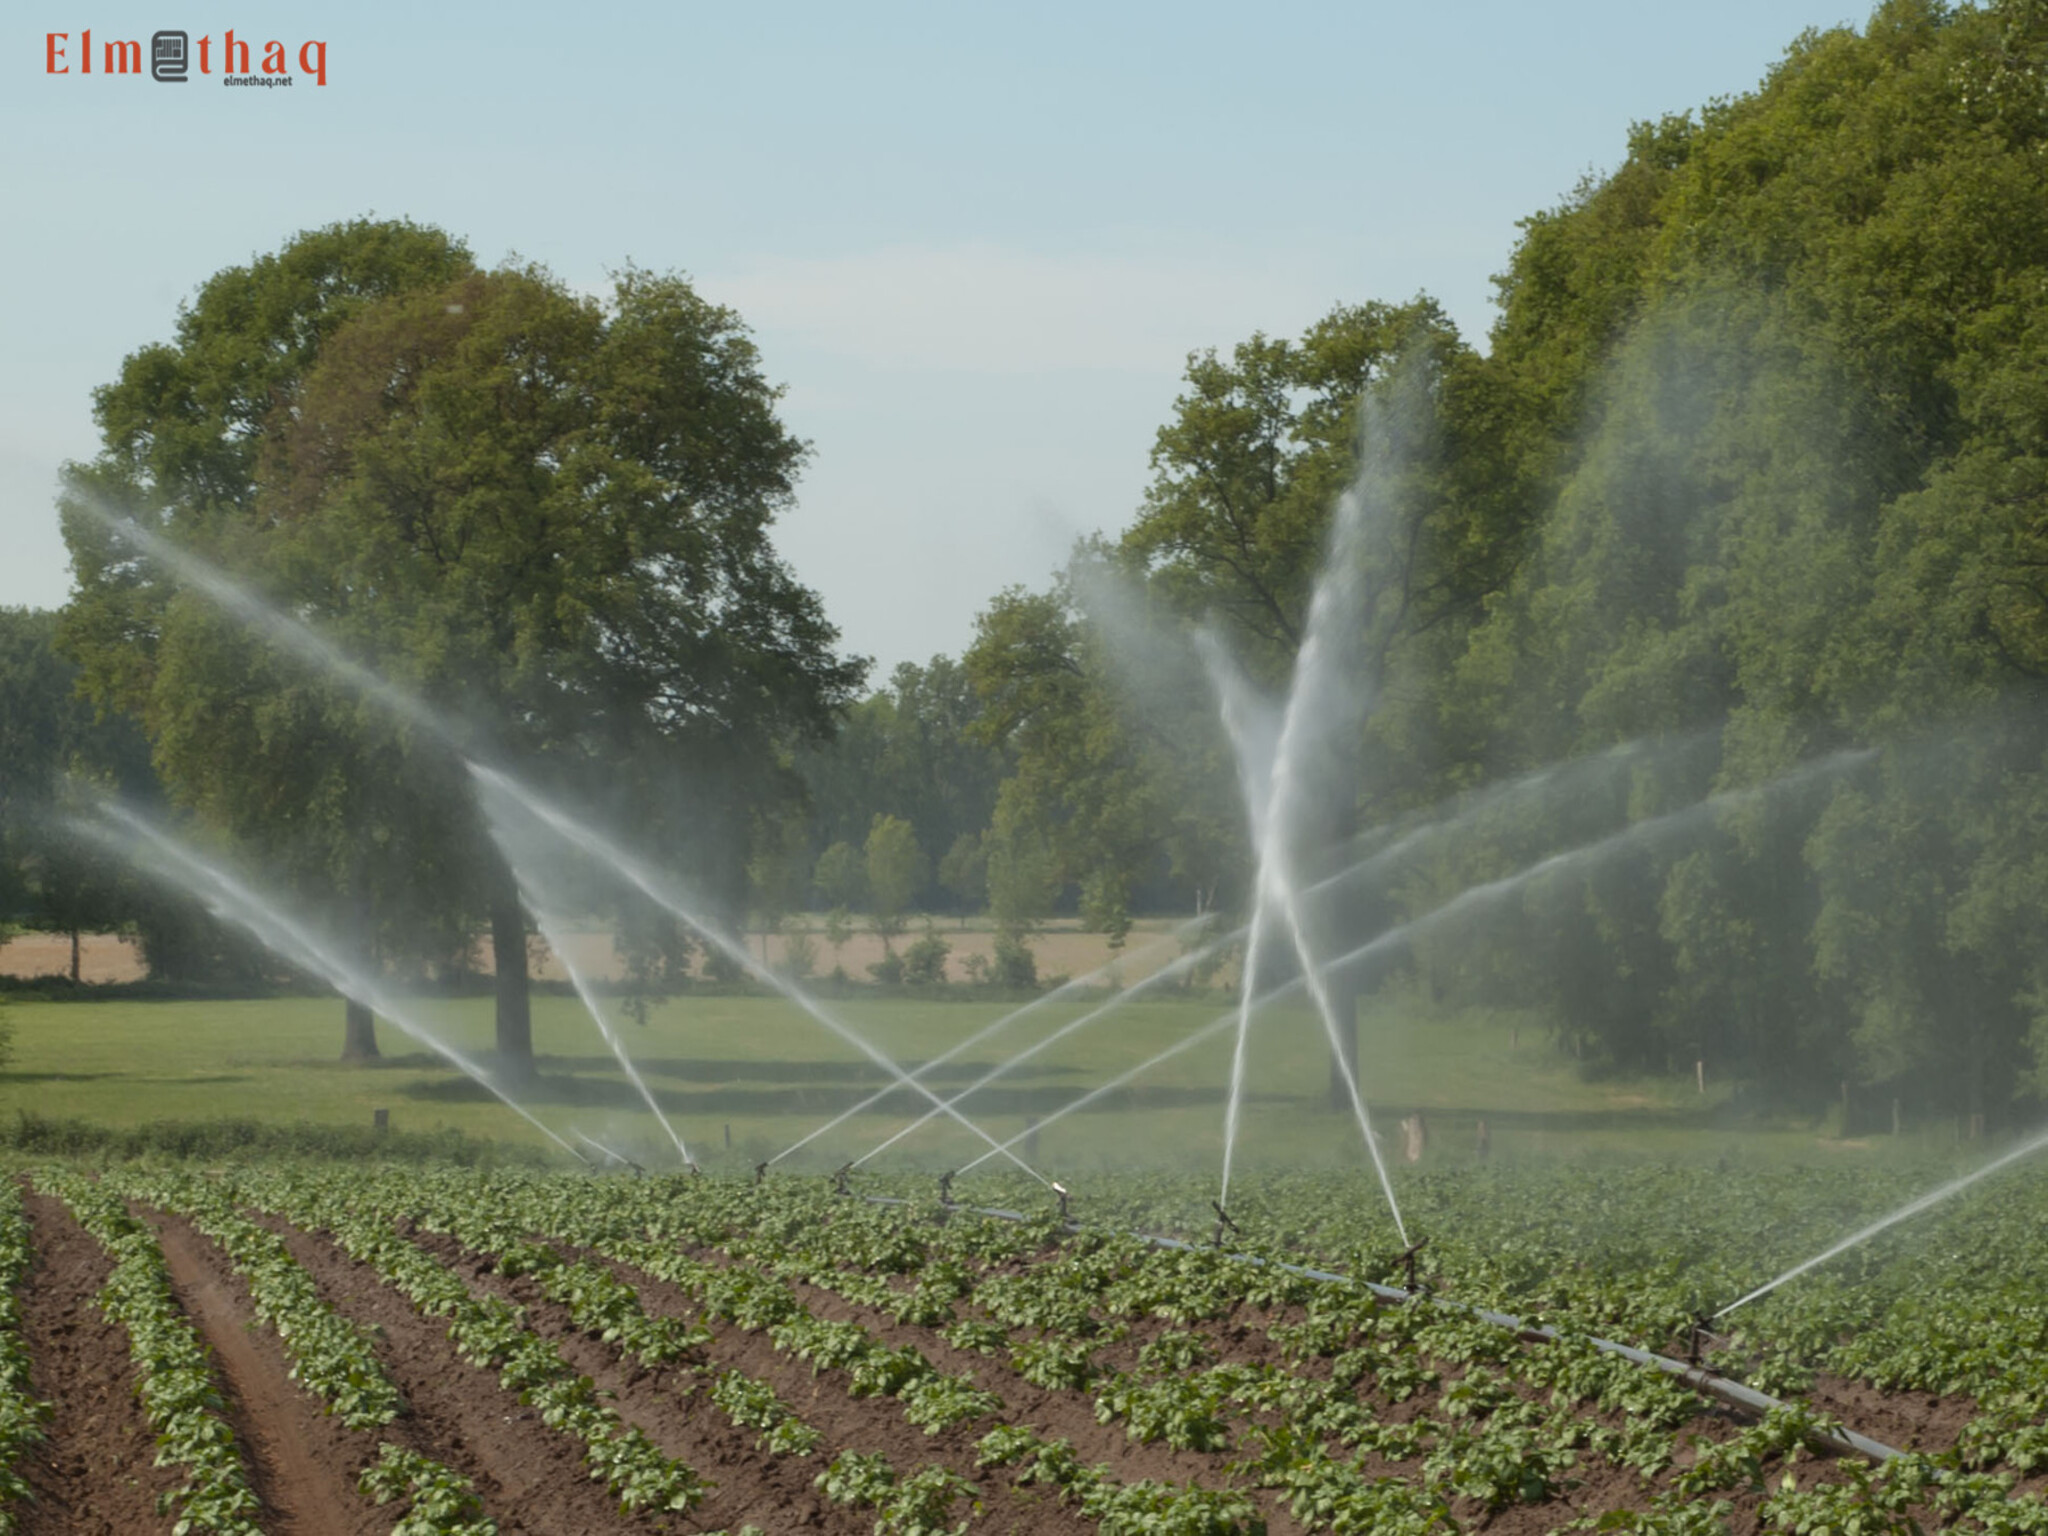 UAE unveils Watering 8 Farmlands After Irrigation System Revival